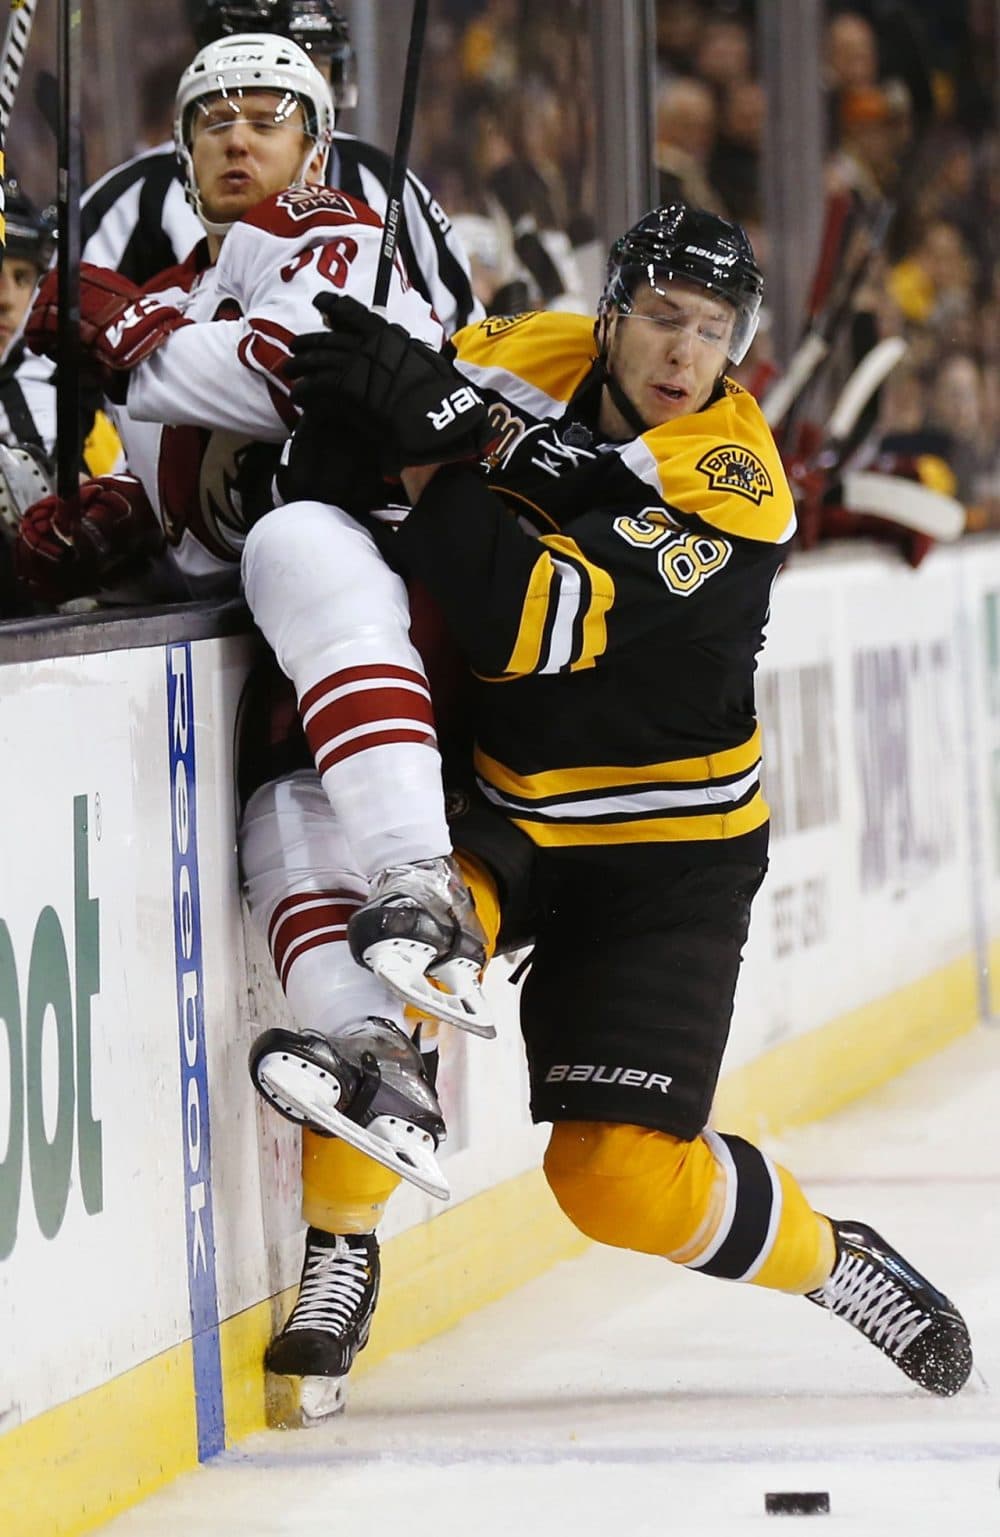 Boston Bruins' Jordan Caron checks Phoenix Coyotes' Rob Klinkhammer into the boards during the third period of Boston's 2-1 win in an NHL hockey game in Boston Thursday, March 13, 2014. (Winslow Townson/AP)